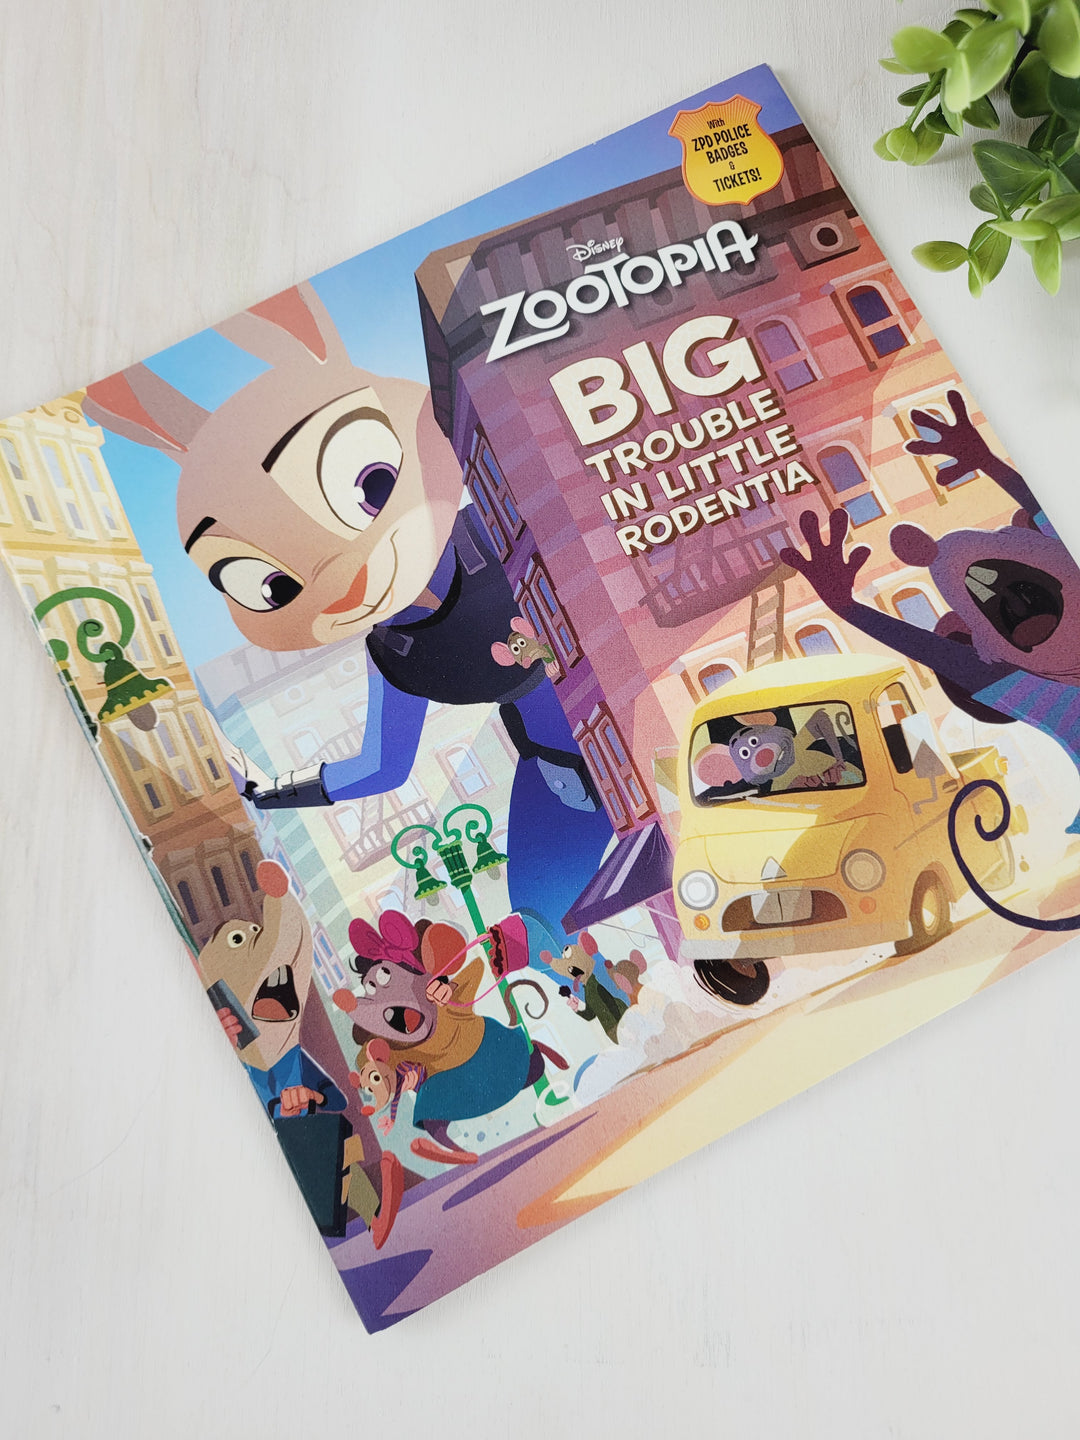 ZOOTOPIA BIG TROUBLE IN LITTLE RODENTIA STORYBOOK EUC